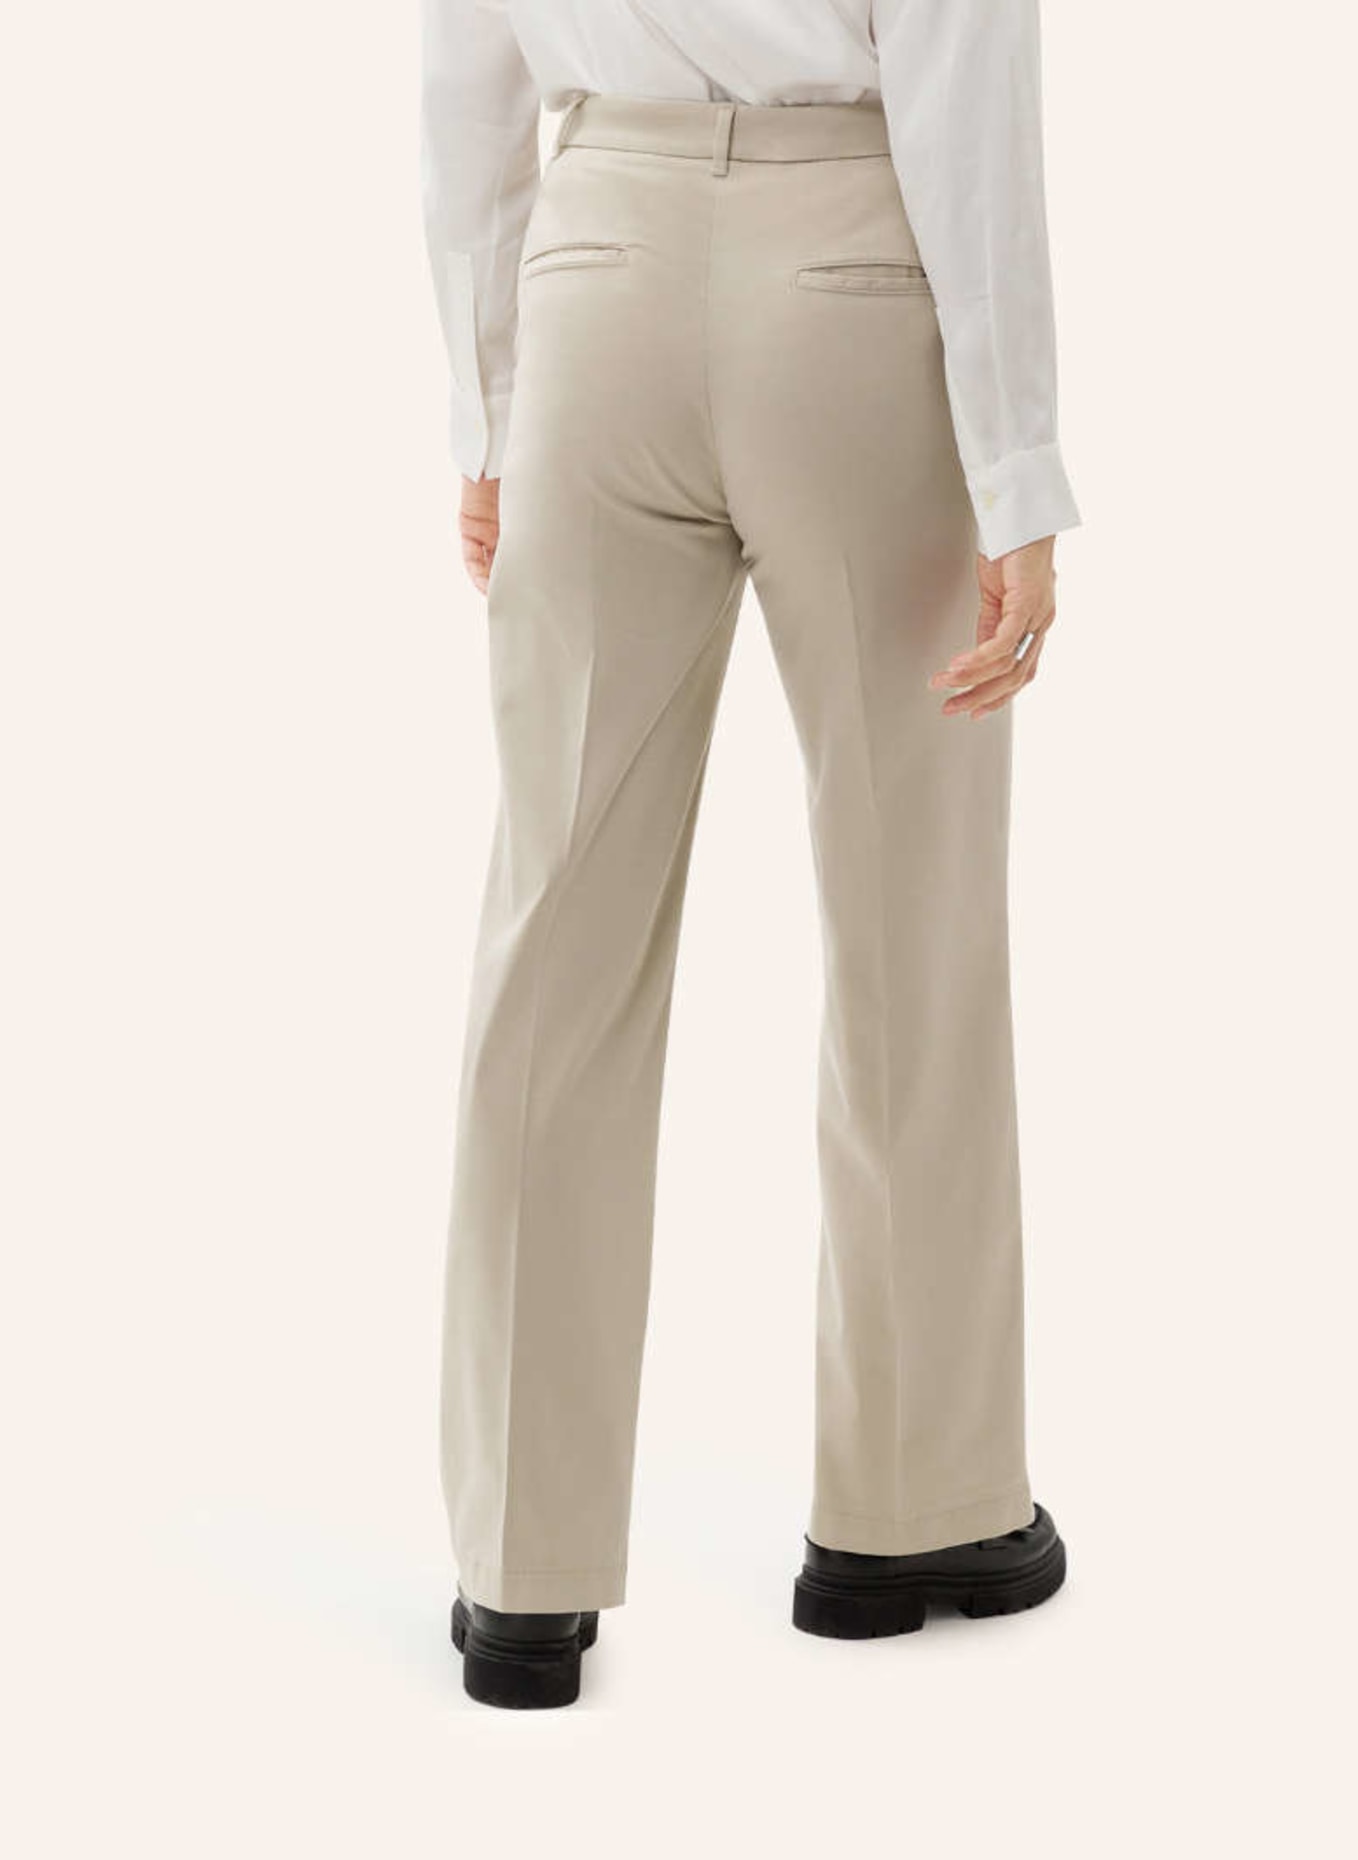 STYLE MAINE Palazzohose beige in BRAX